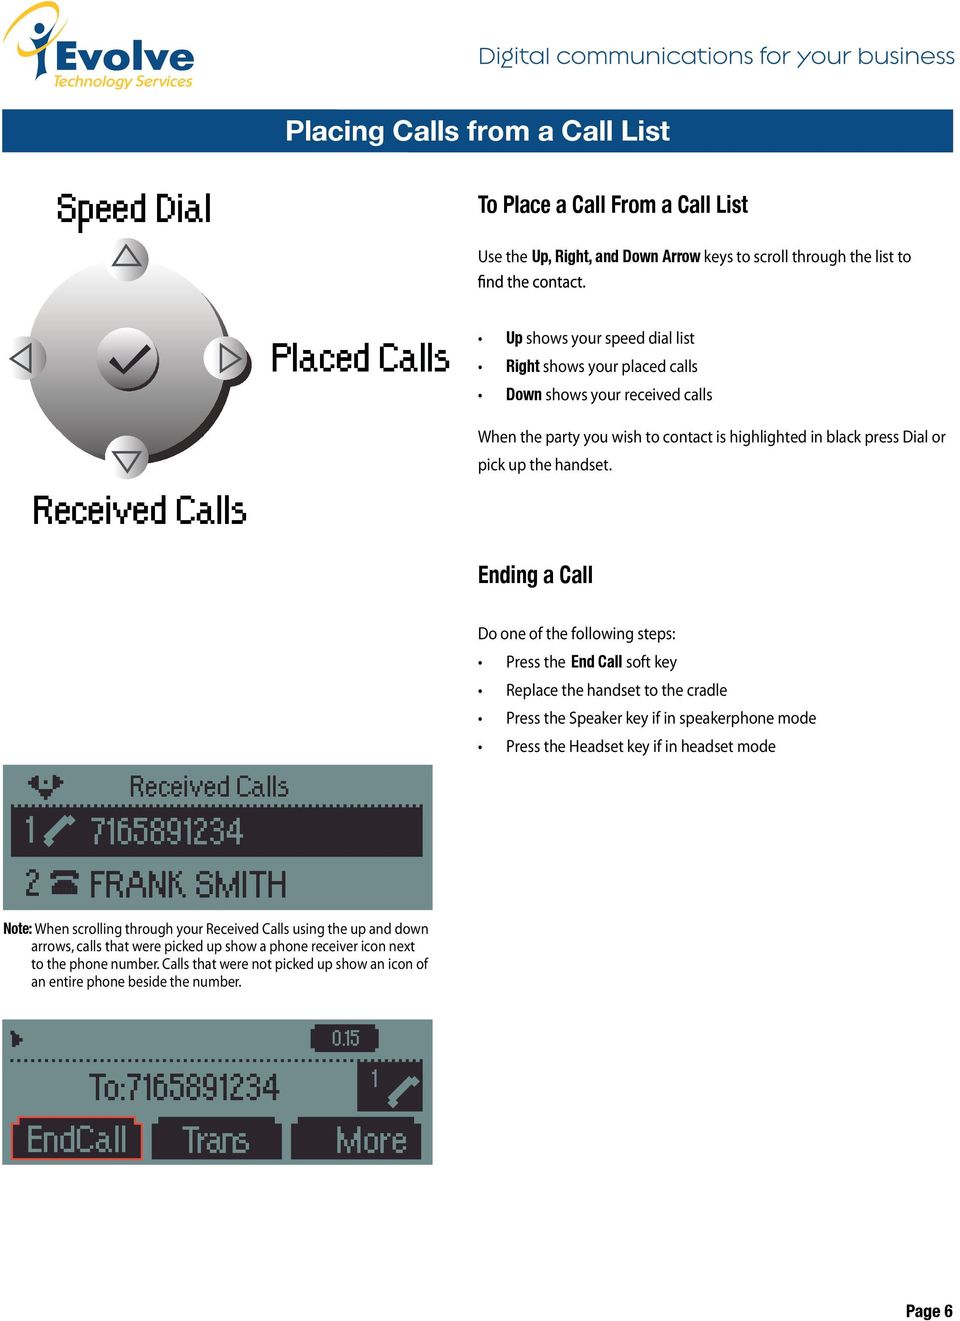 Ending a Call 2 Received Calls 76589234 FRANK SMITH Note: When scrolling through your Received Calls using the up and down arrows, calls that were picked up show a phone receiver icon next to the